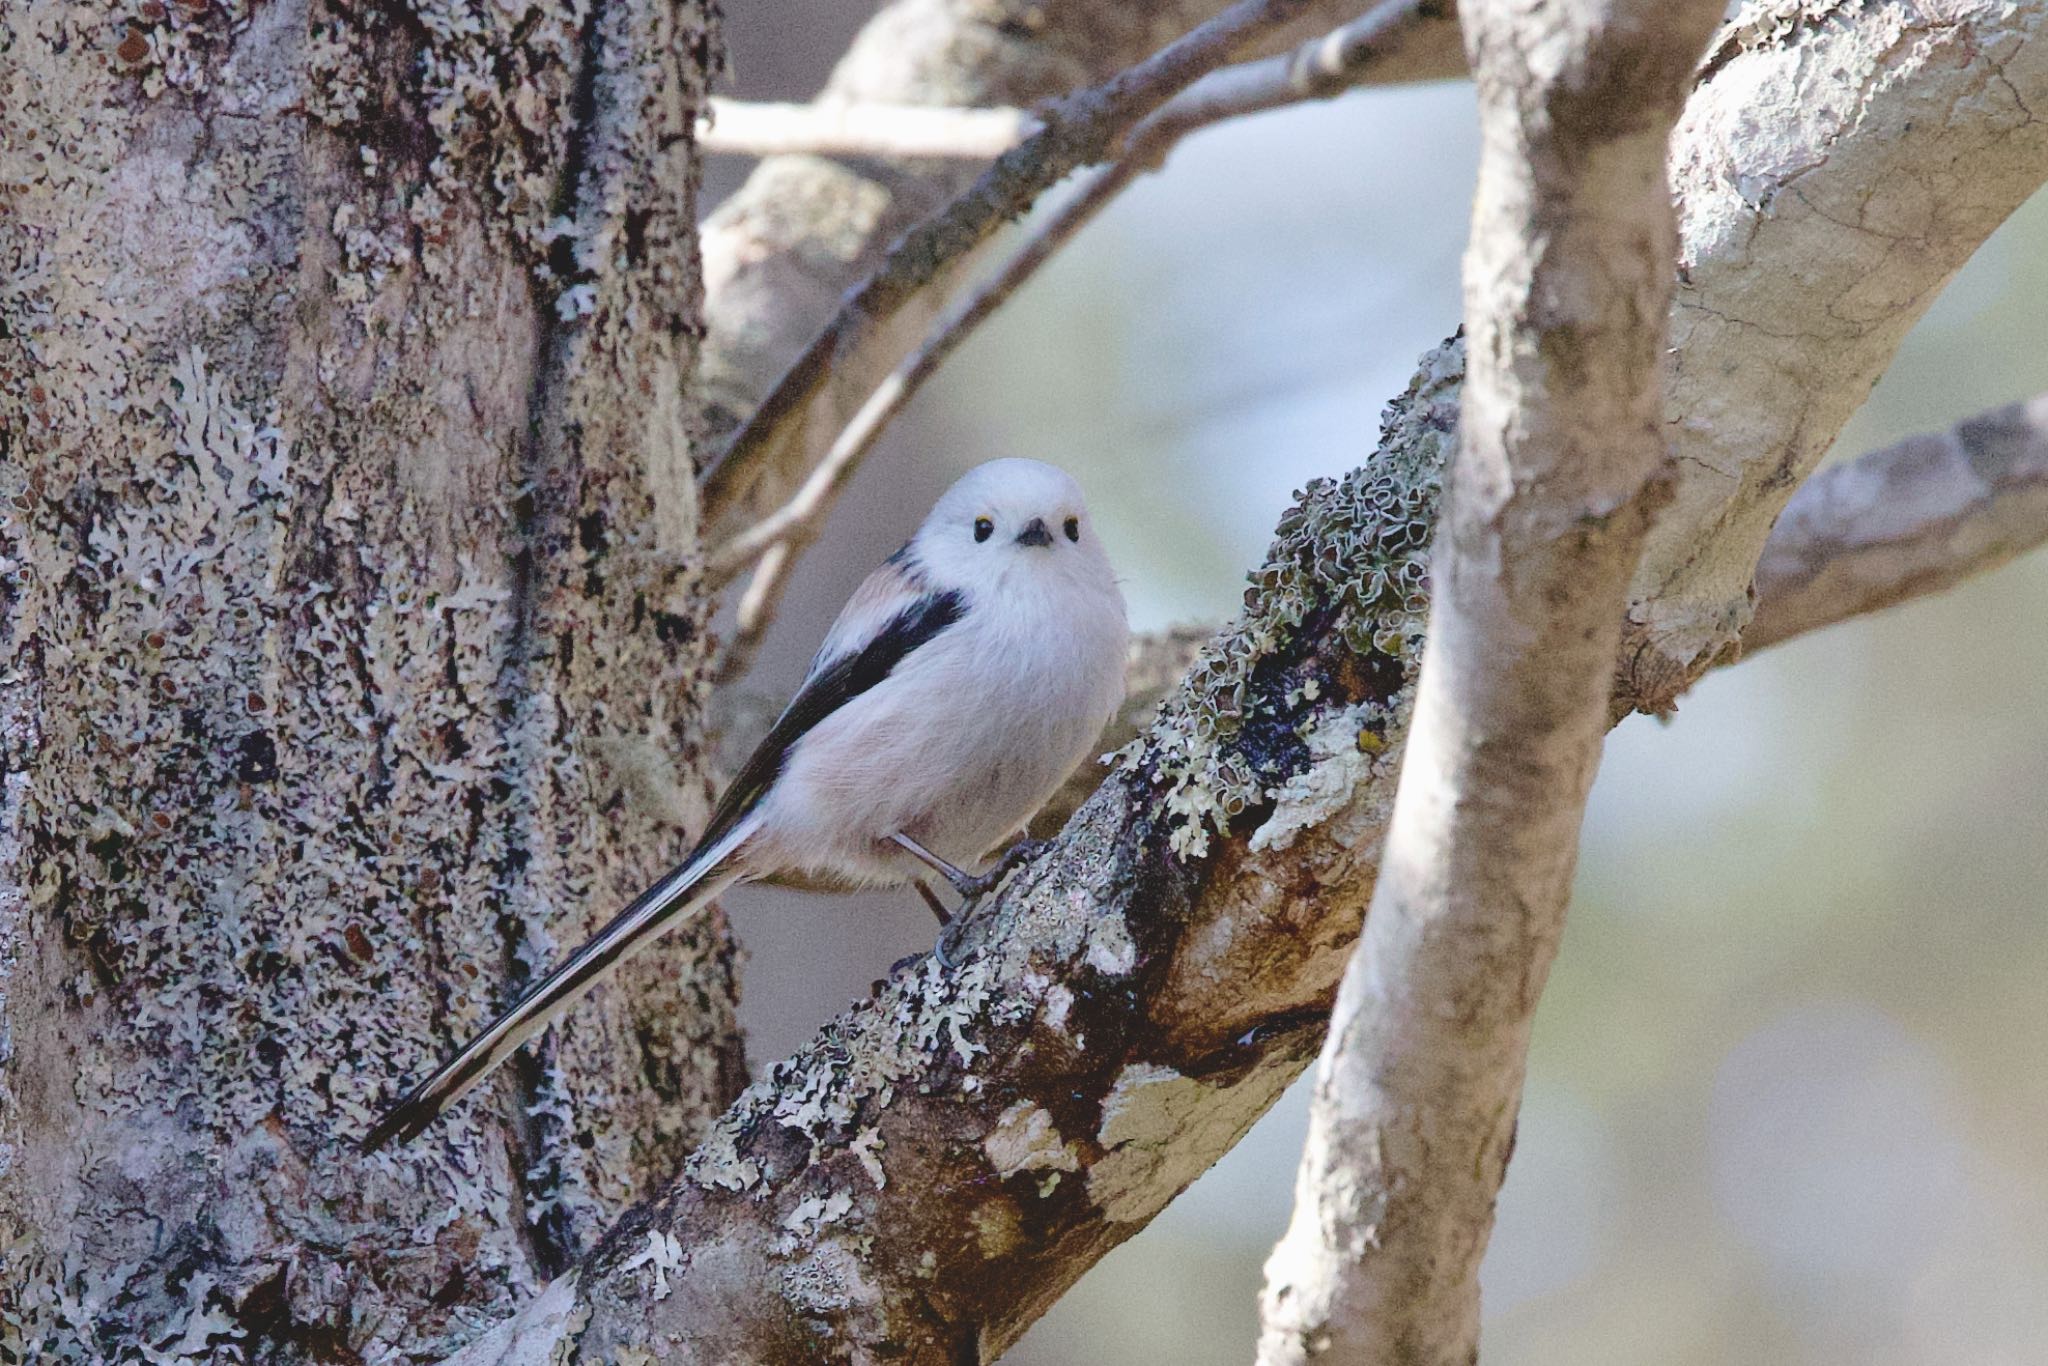 Photo of Long-tailed tit(japonicus) at 苫小牧市;北海道 by ウレシカ